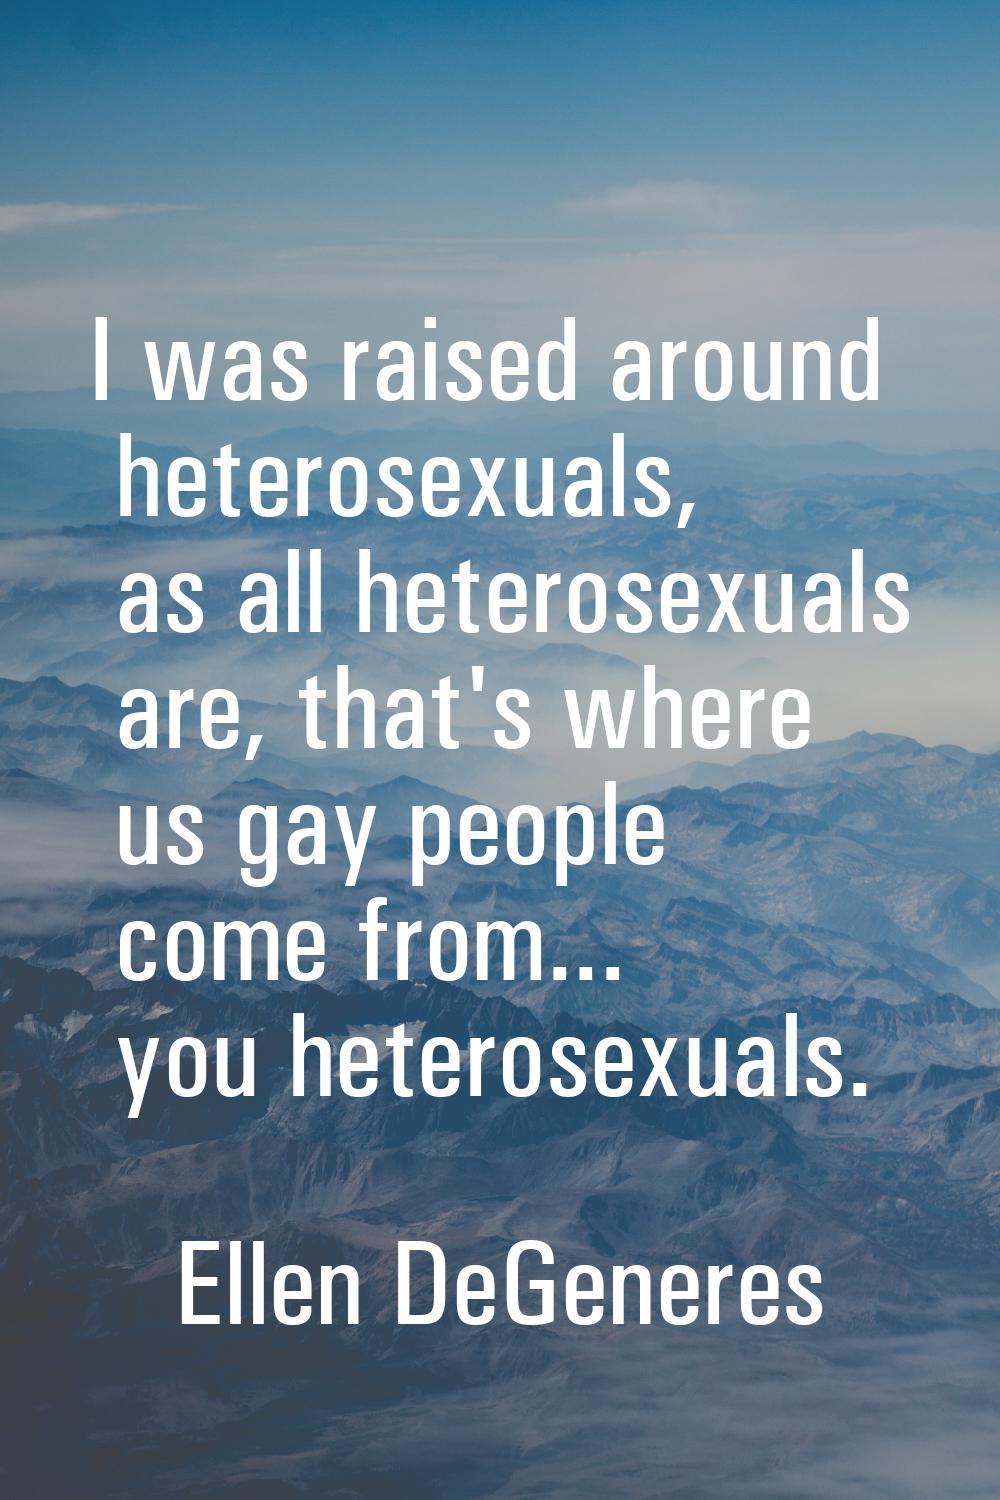 I was raised around heterosexuals, as all heterosexuals are, that's where us gay people come from..